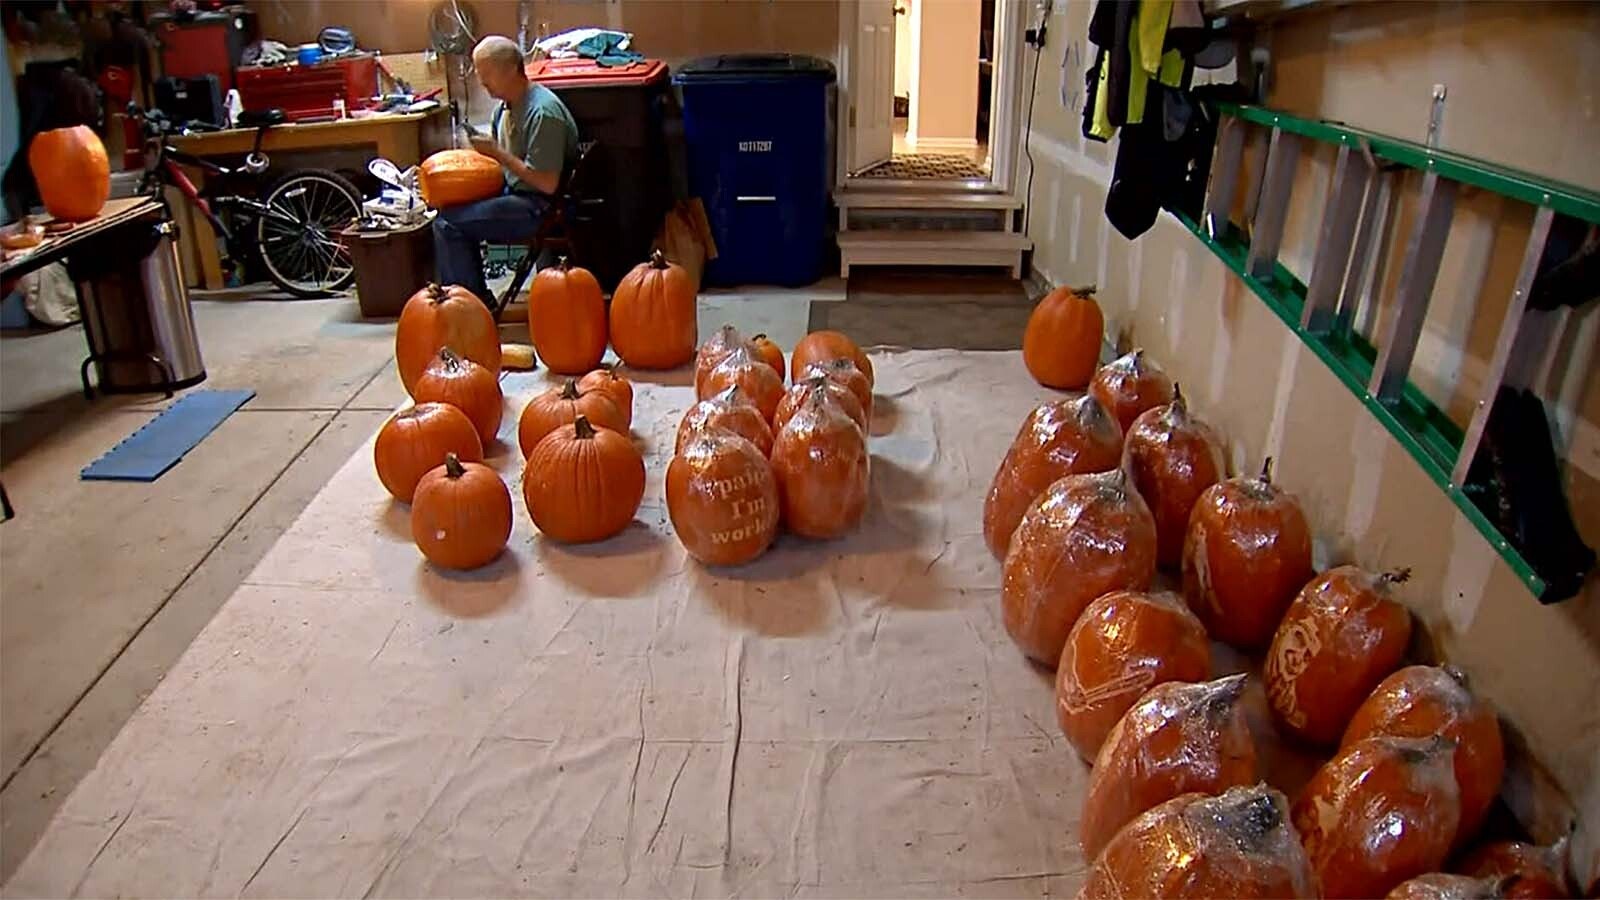 Dave Cunningham spends days carving 70-80 pumpkins each Halloween. He wraps them in plastic wrap to keep them fresh.